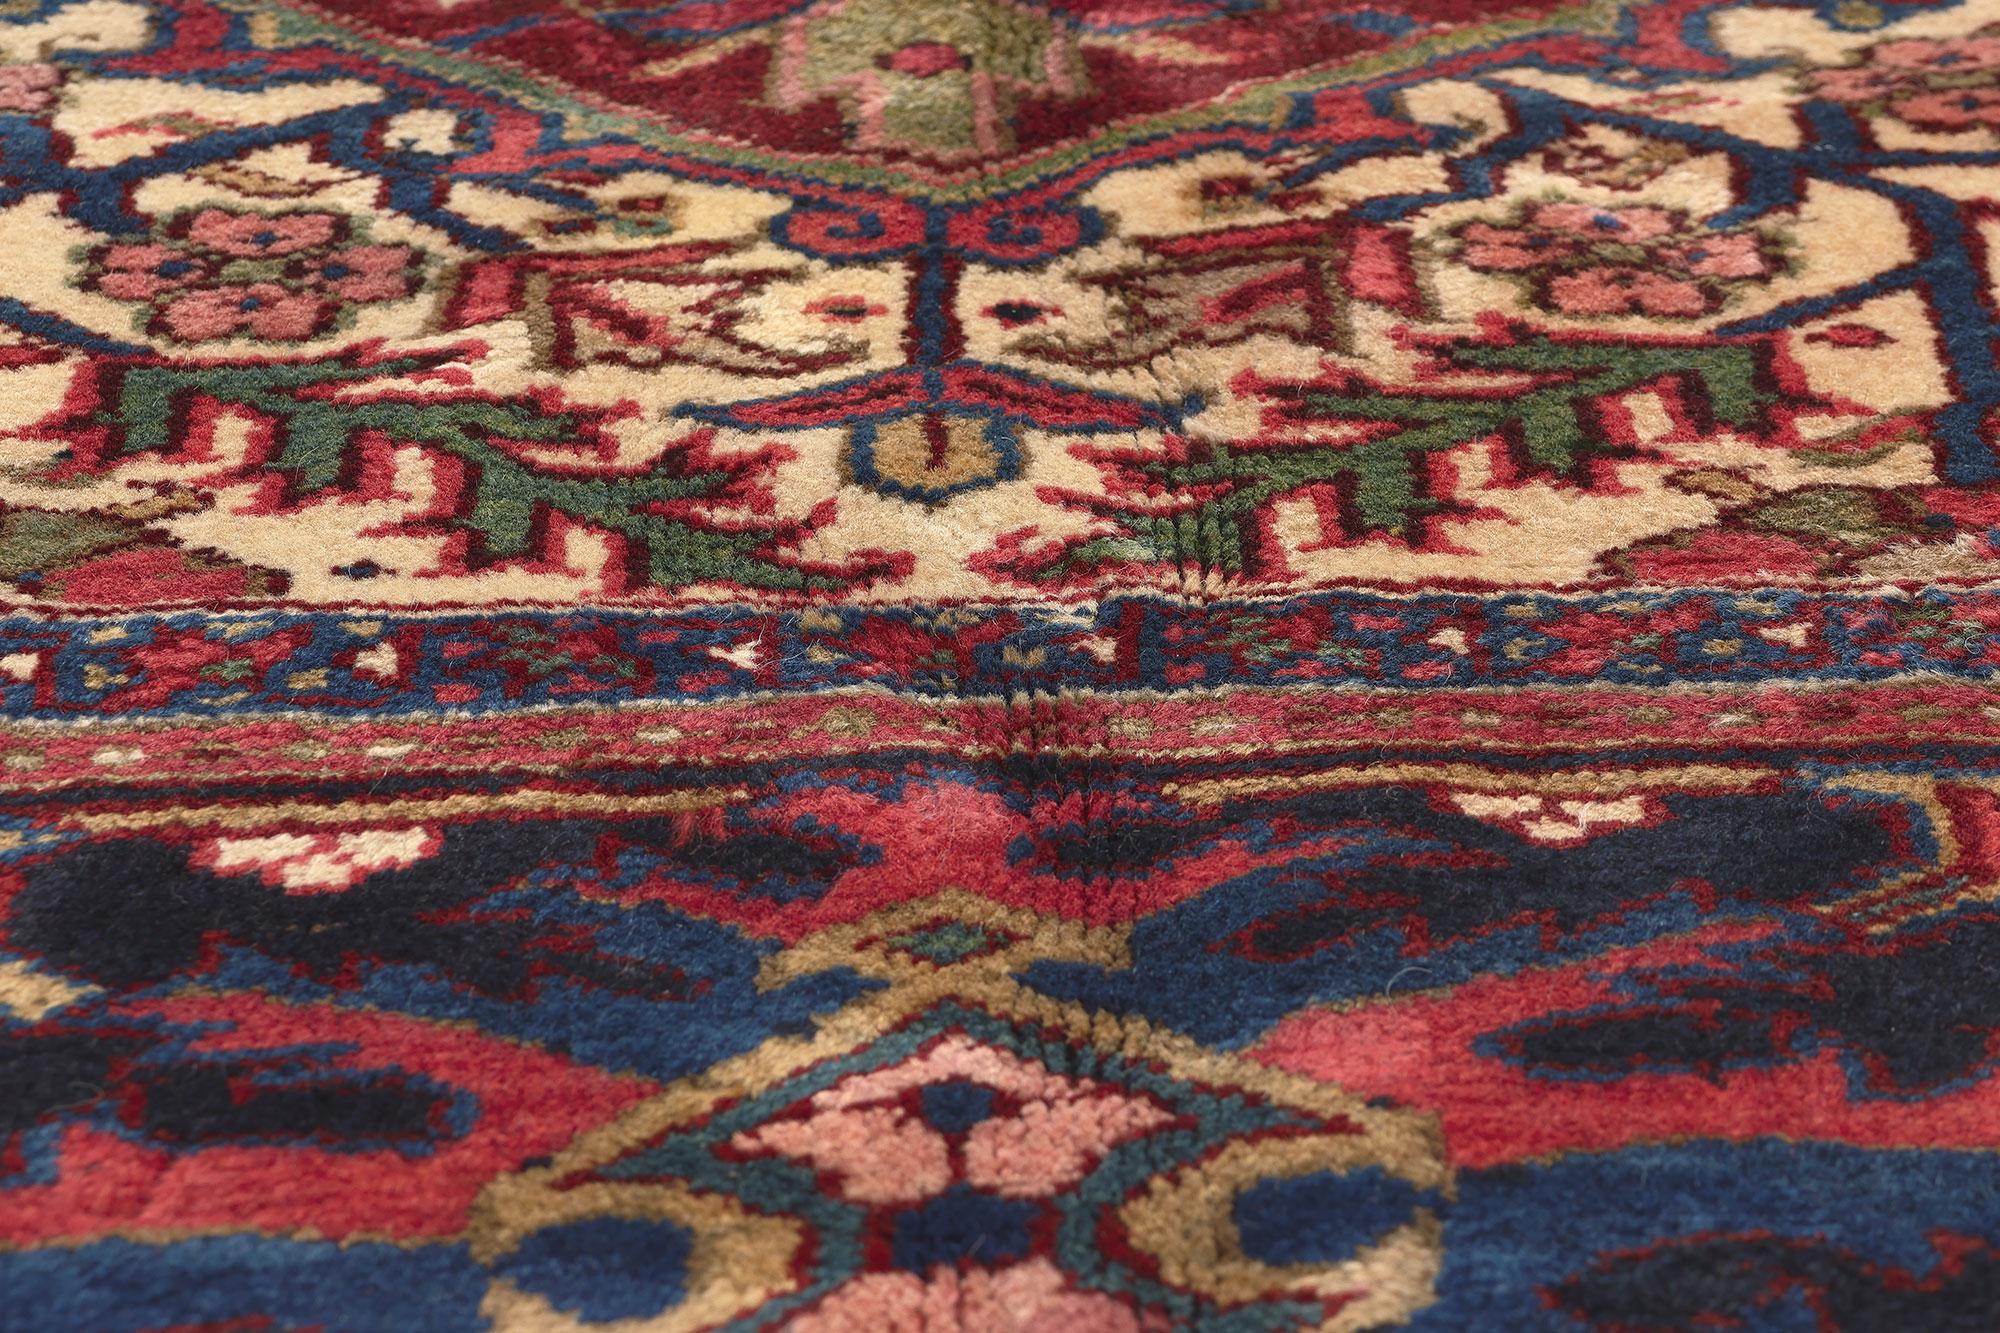 Antique Persian Heriz Rug, Ivy League Prep Meets Old World Charm In Good Condition For Sale In Dallas, TX